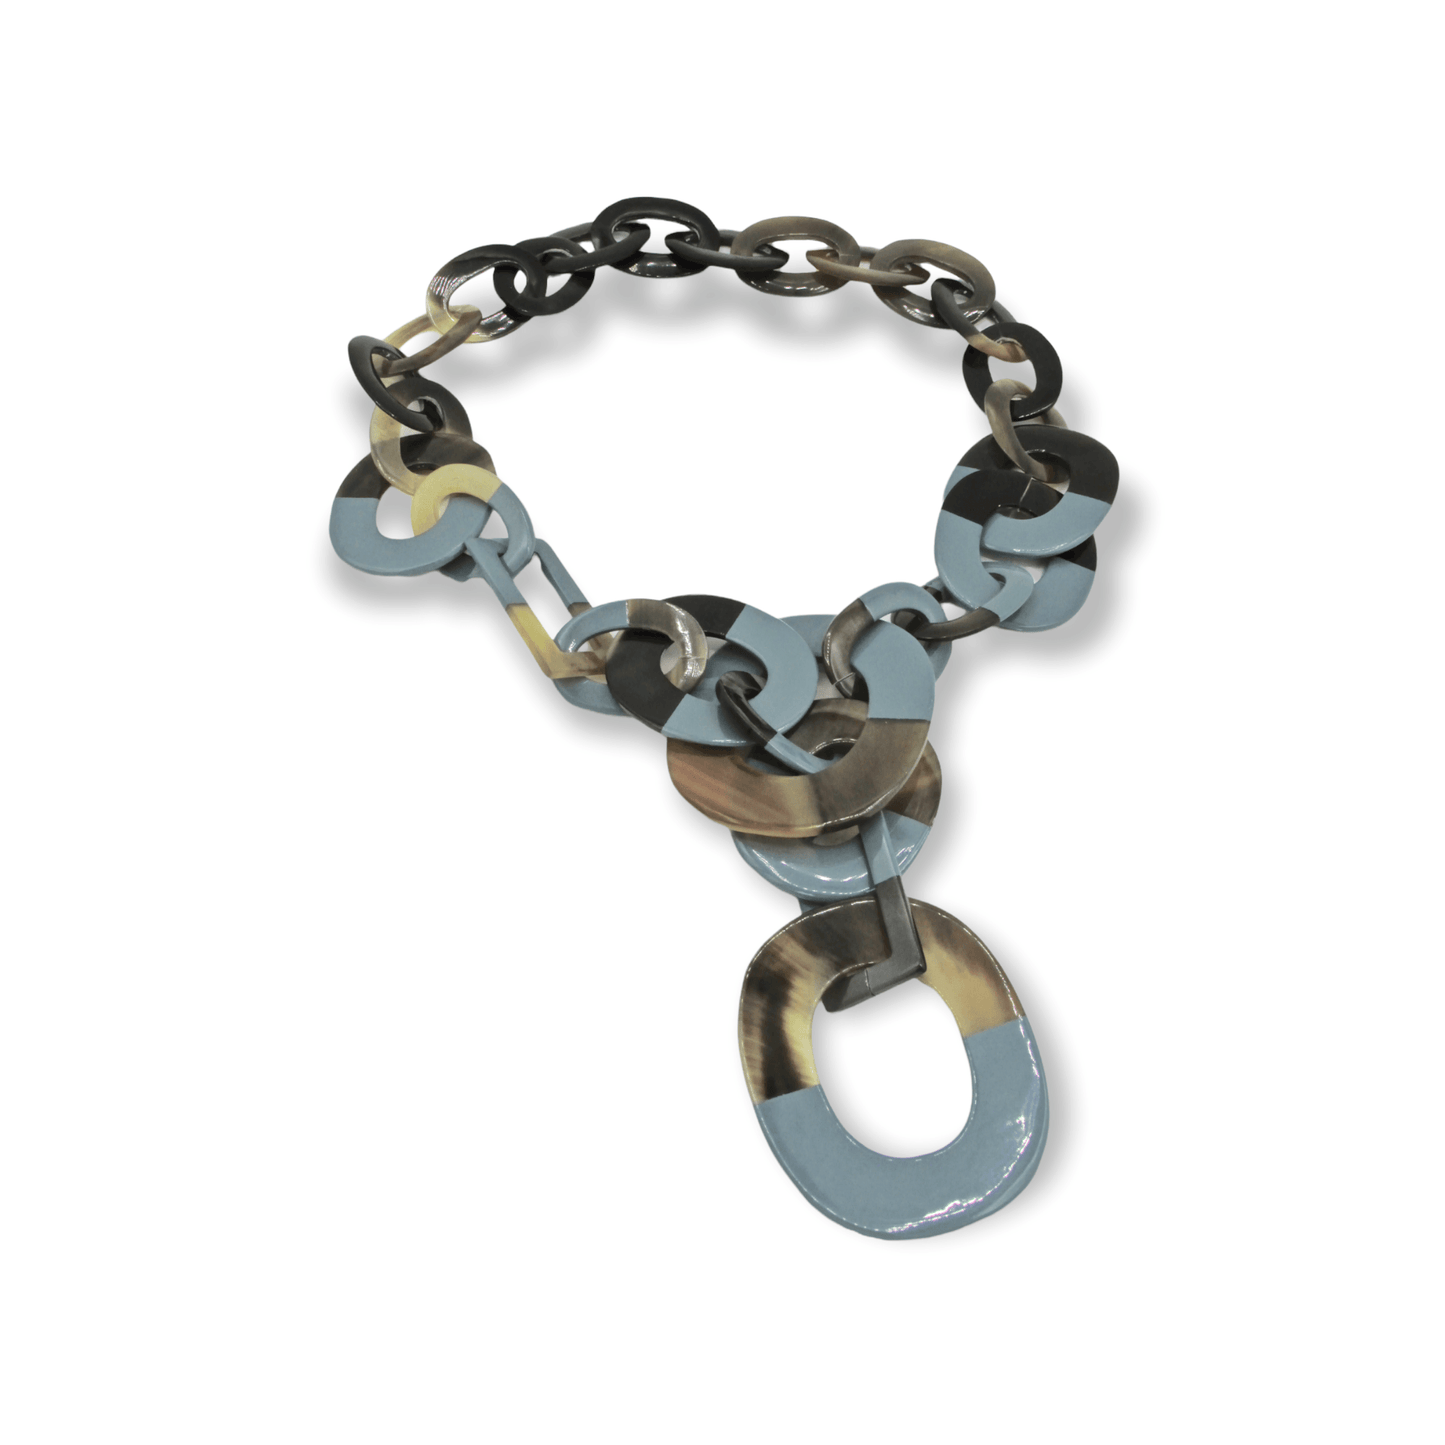 Bold chainlink statement necklace with a spot of colorSundara Joon